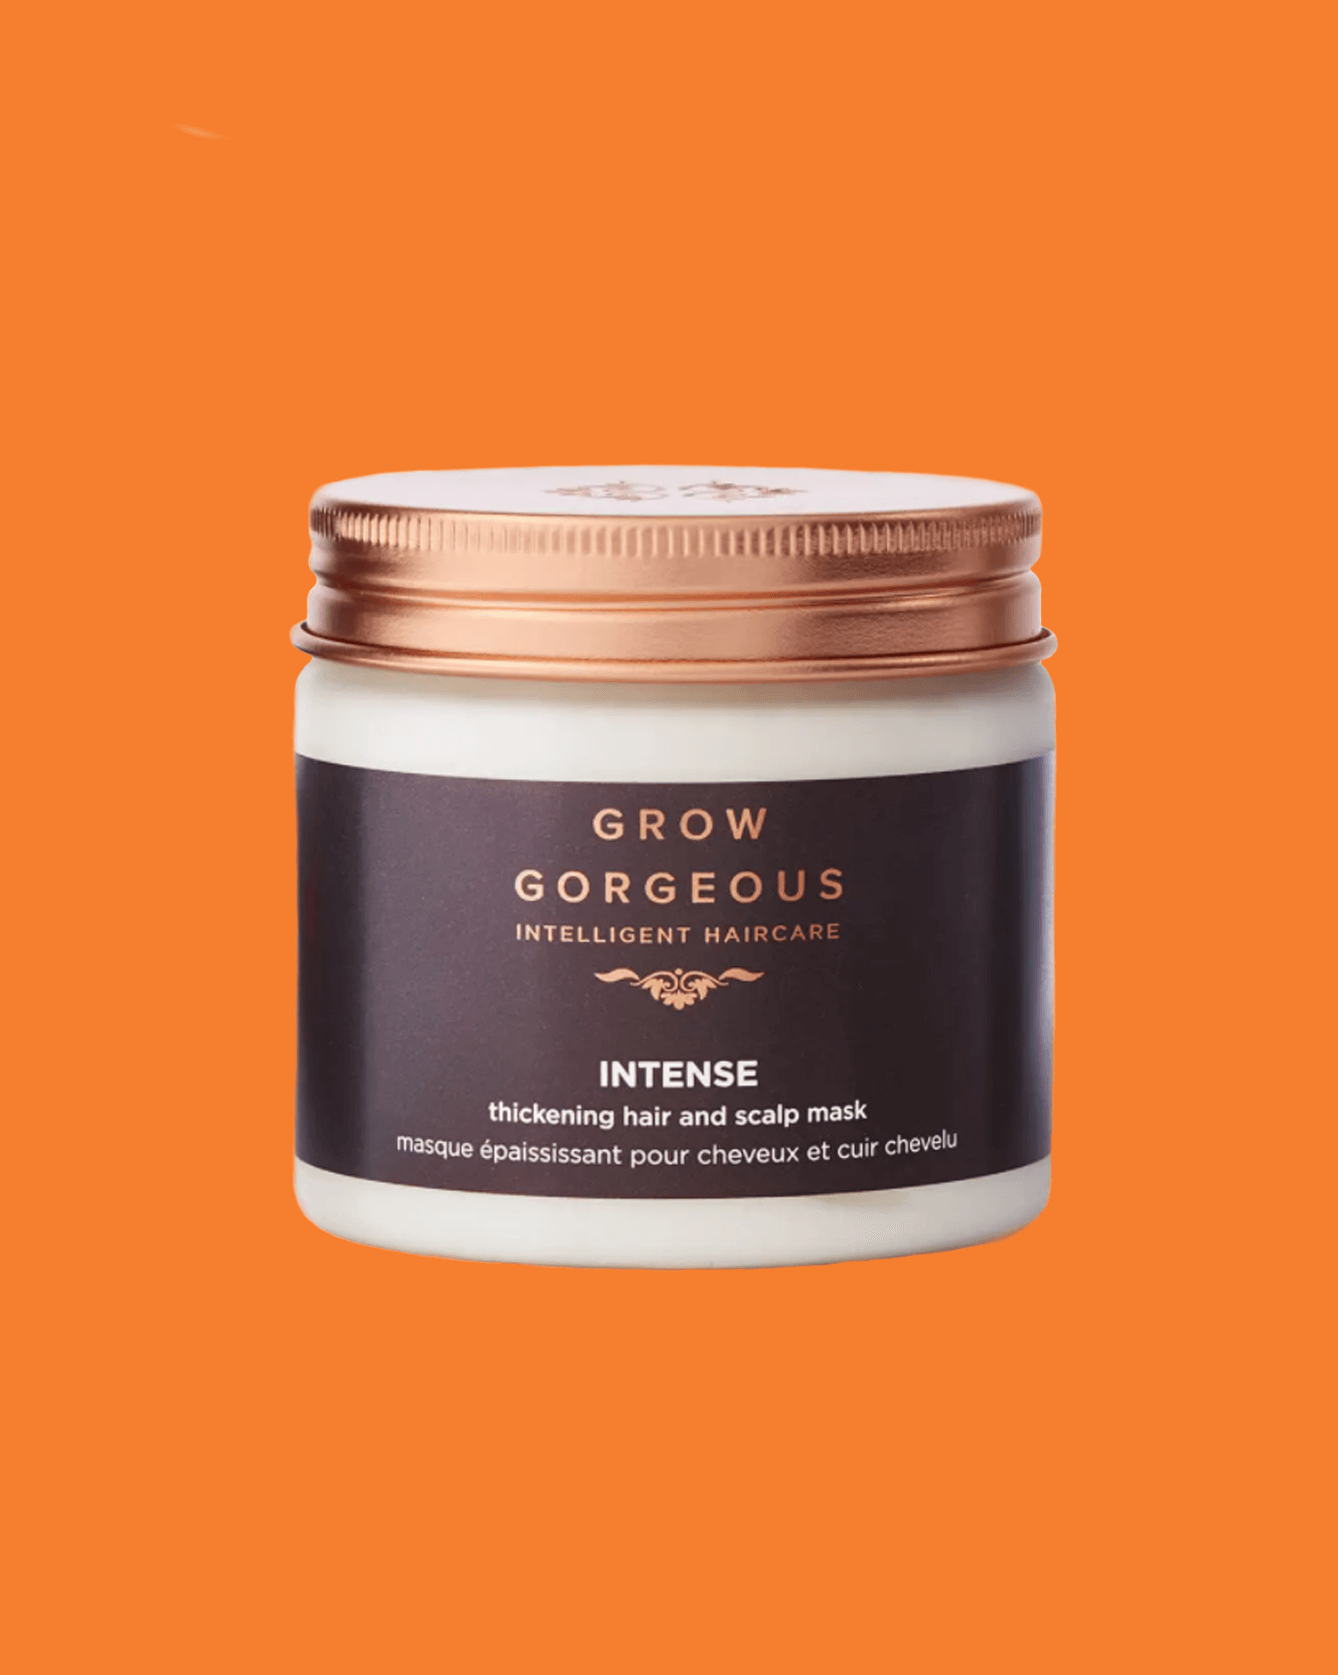 Product photo of Grow Gorgeous Intense Thickening Hair & Scalp Mask.